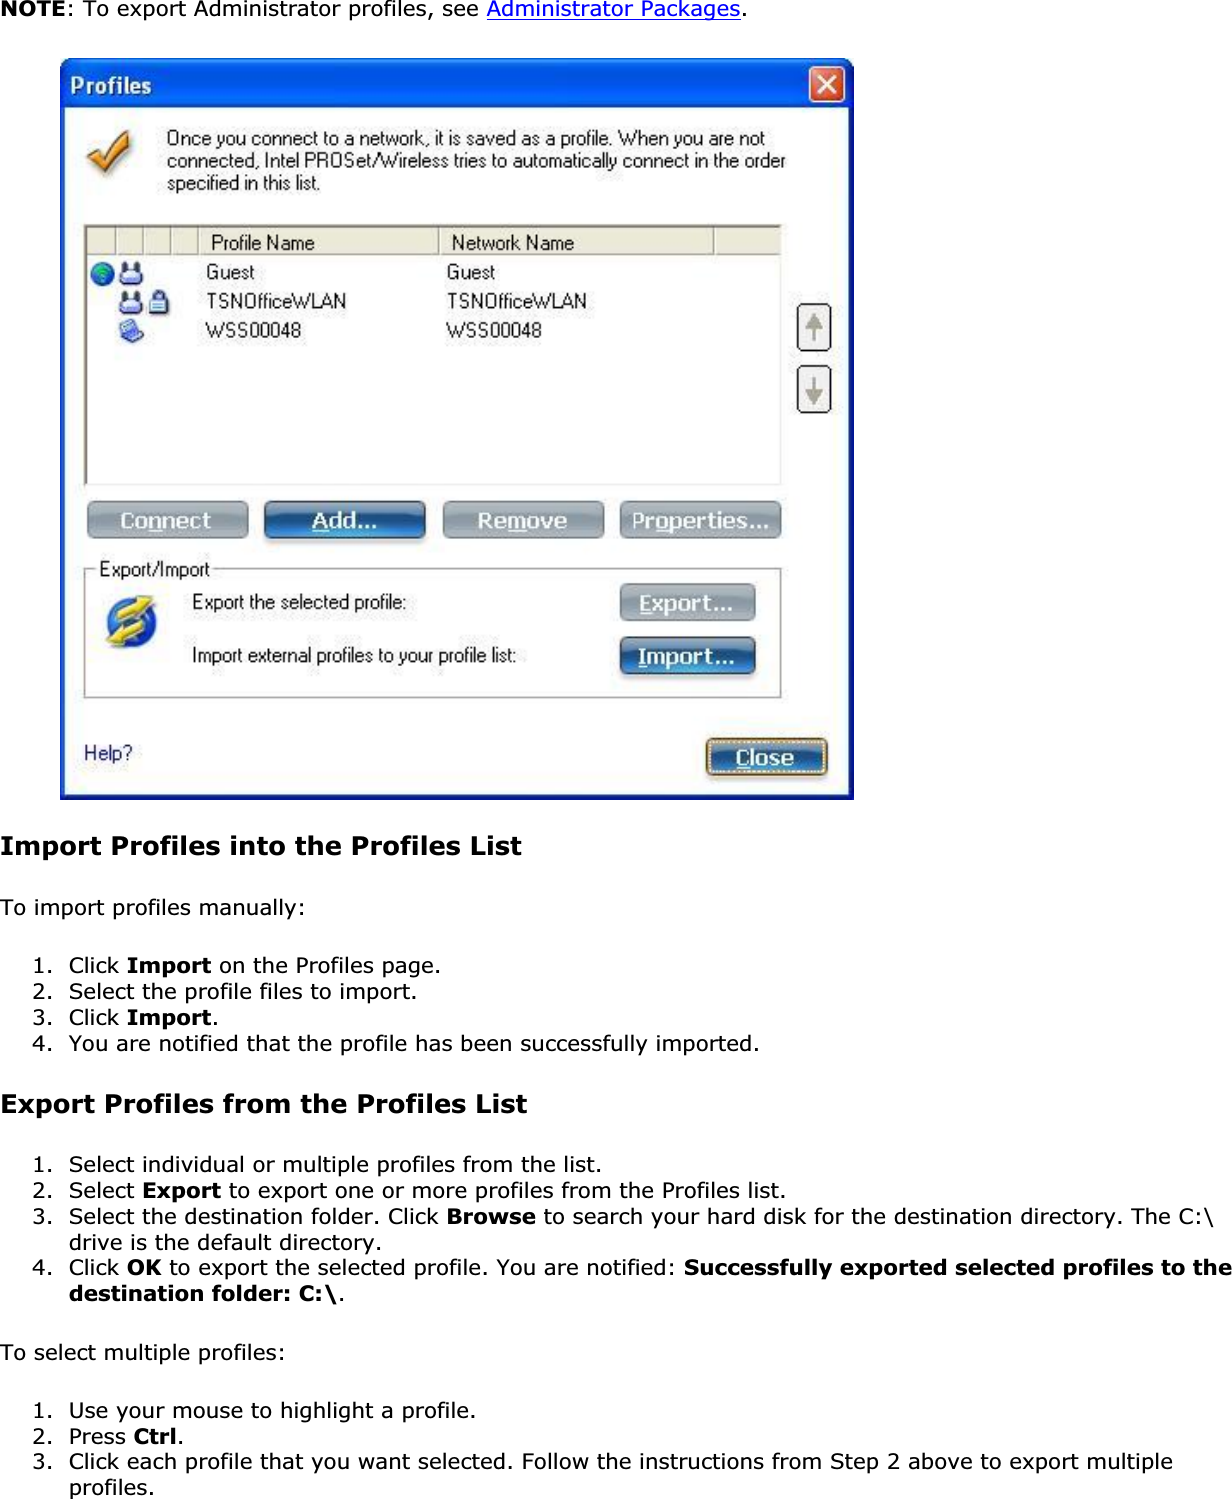 NOTE: To export Administrator profiles, see Administrator Packages.Import Profiles into the Profiles ListTo import profiles manually:1. Click Import on the Profiles page.2. Select the profile files to import.3. Click Import.4. You are notified that the profile has been successfully imported.Export Profiles from the Profiles List1. Select individual or multiple profiles from the list.2. Select Export to export one or more profiles from the Profiles list.3. Select the destination folder. Click Browse to search your hard disk for the destination directory. The C:\ drive is the default directory.4. Click OK to export the selected profile. You are notified: Successfully exported selected profiles to the destination folder: C:\.To select multiple profiles:1. Use your mouse to highlight a profile.2. Press Ctrl.3. Click each profile that you want selected. Follow the instructions from Step 2 above to export multiple profiles.